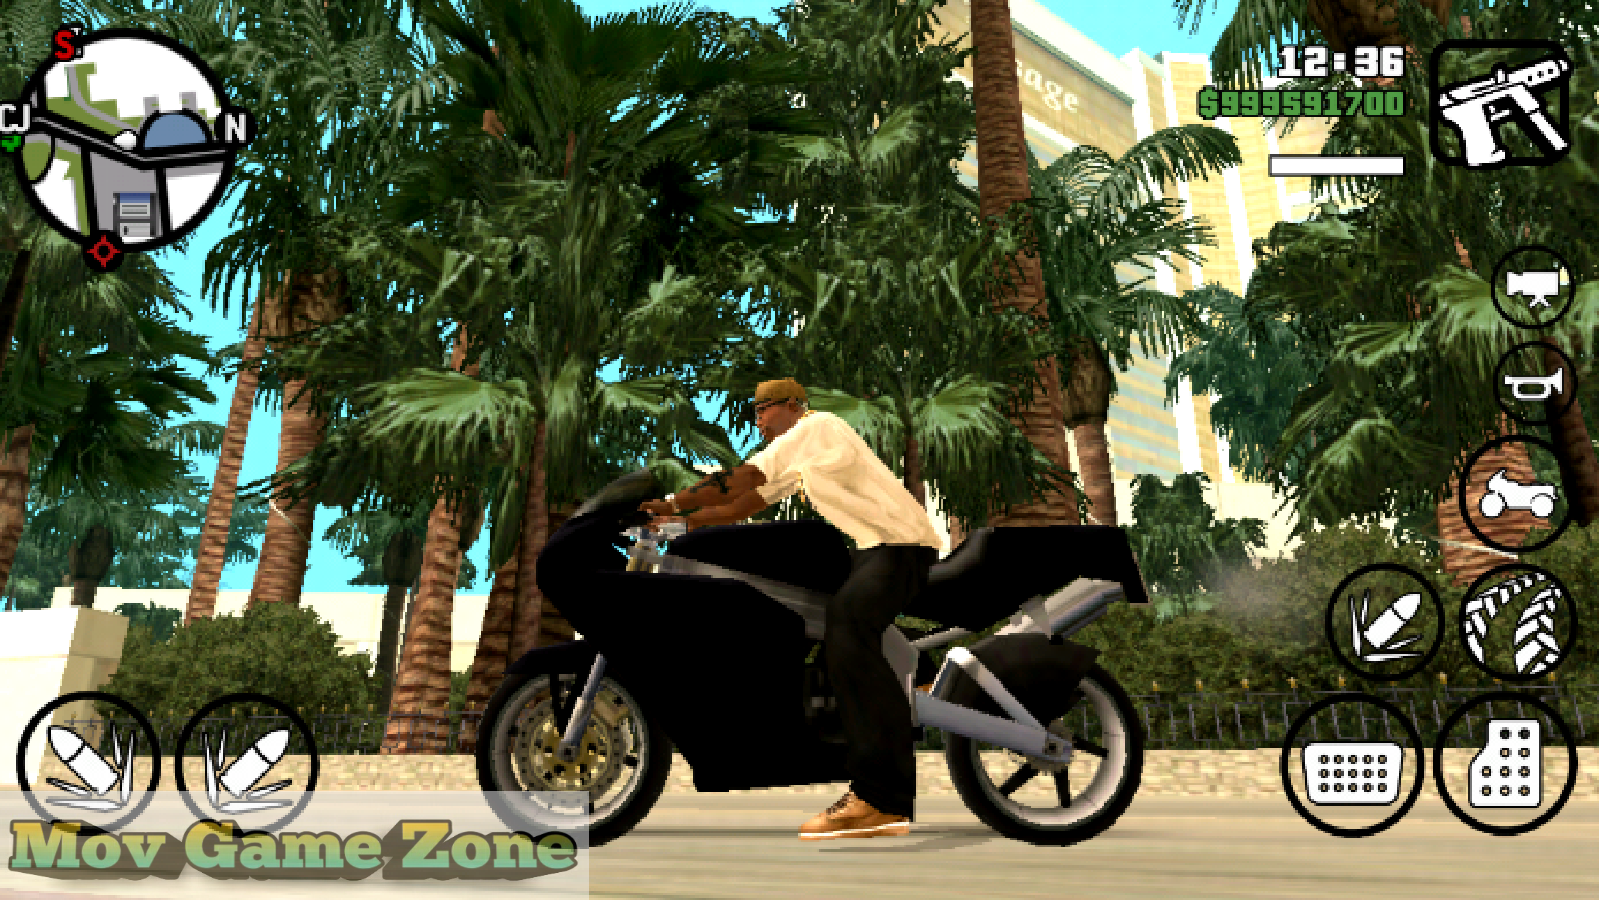 Gta San Andreas Iso File Download For Ppsspp - eventrenew